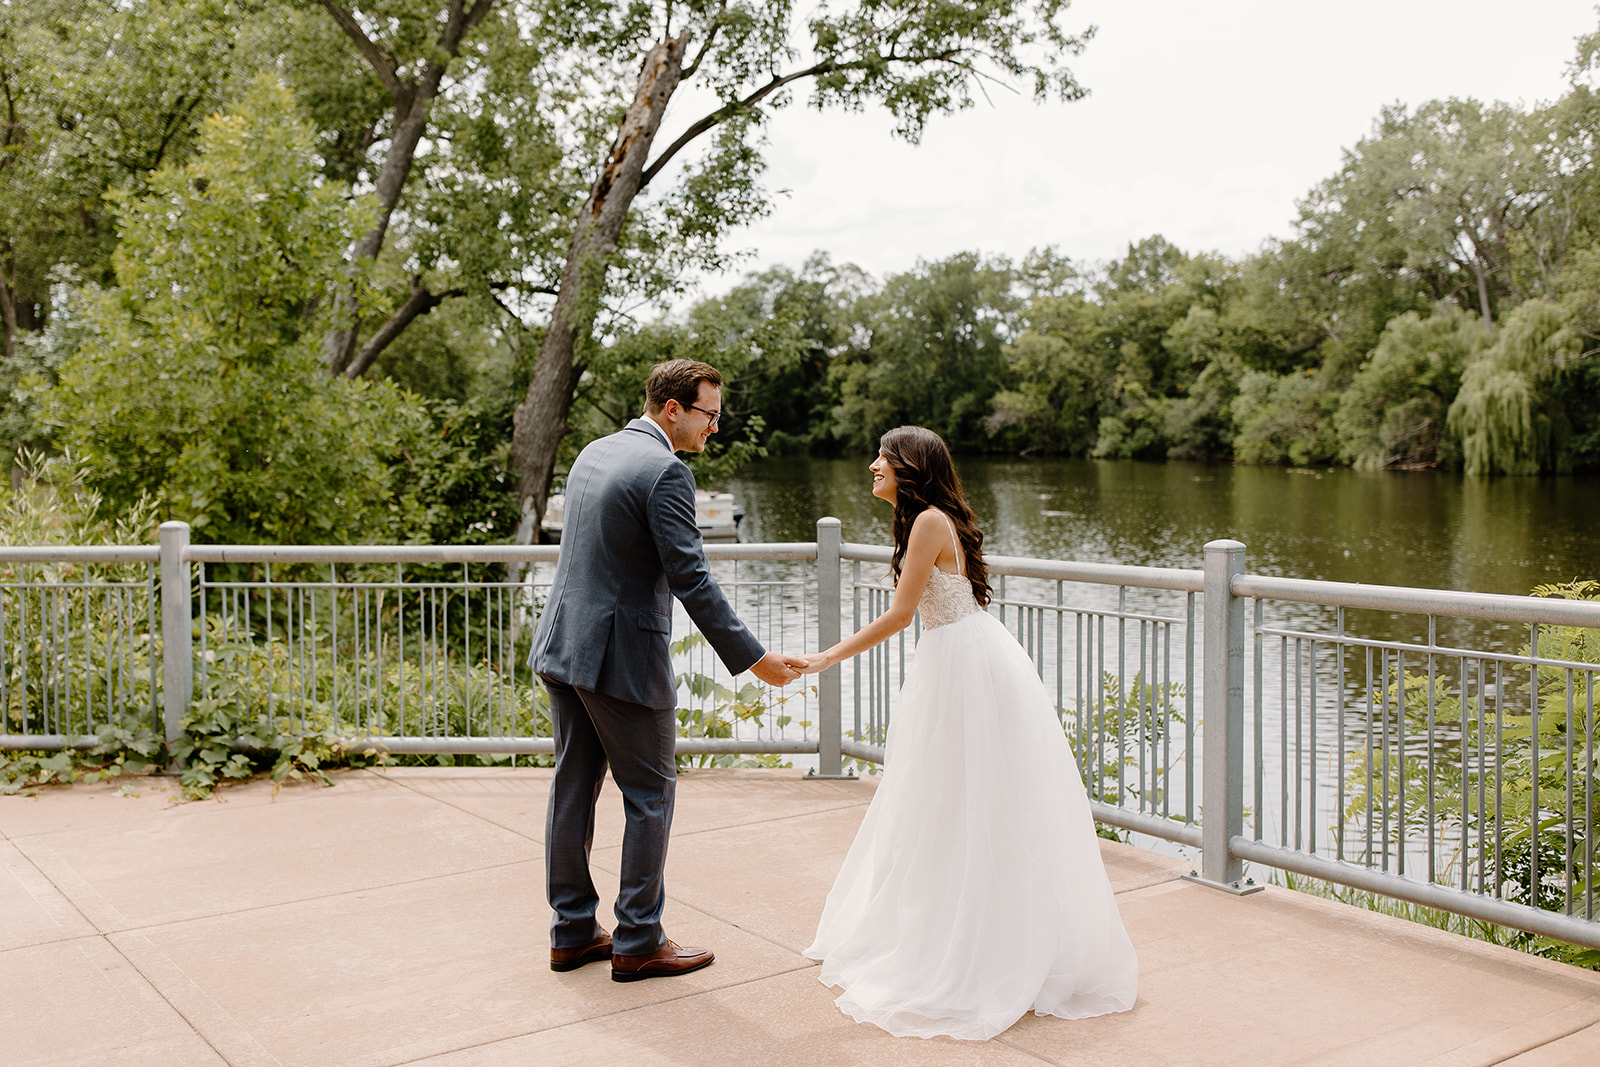 Bride and groom laugh at each other in front of a river